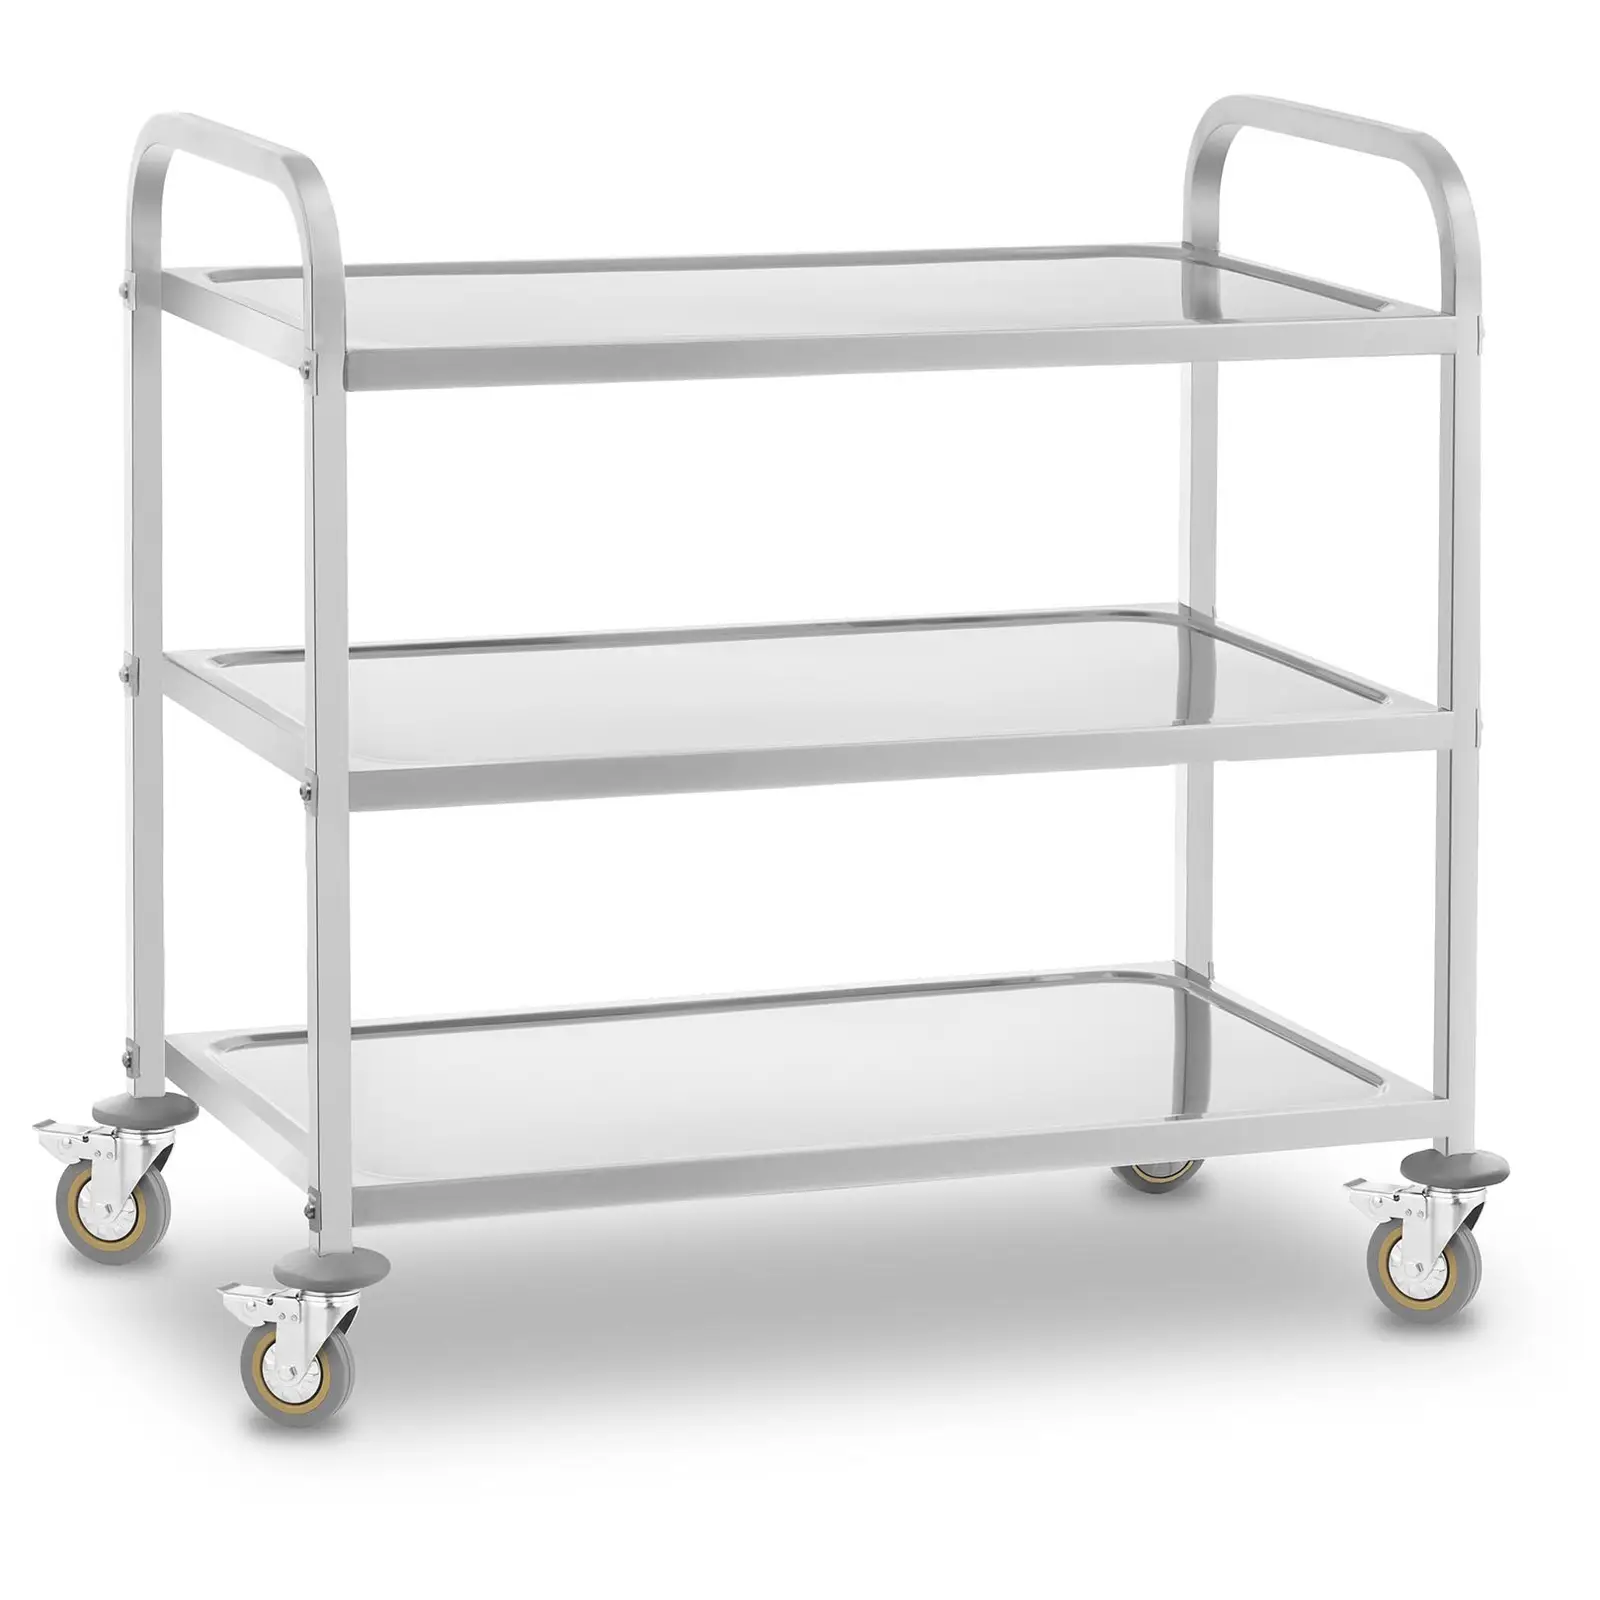 Factory second Serving Trolley - 3 shelves - up to 500 kg